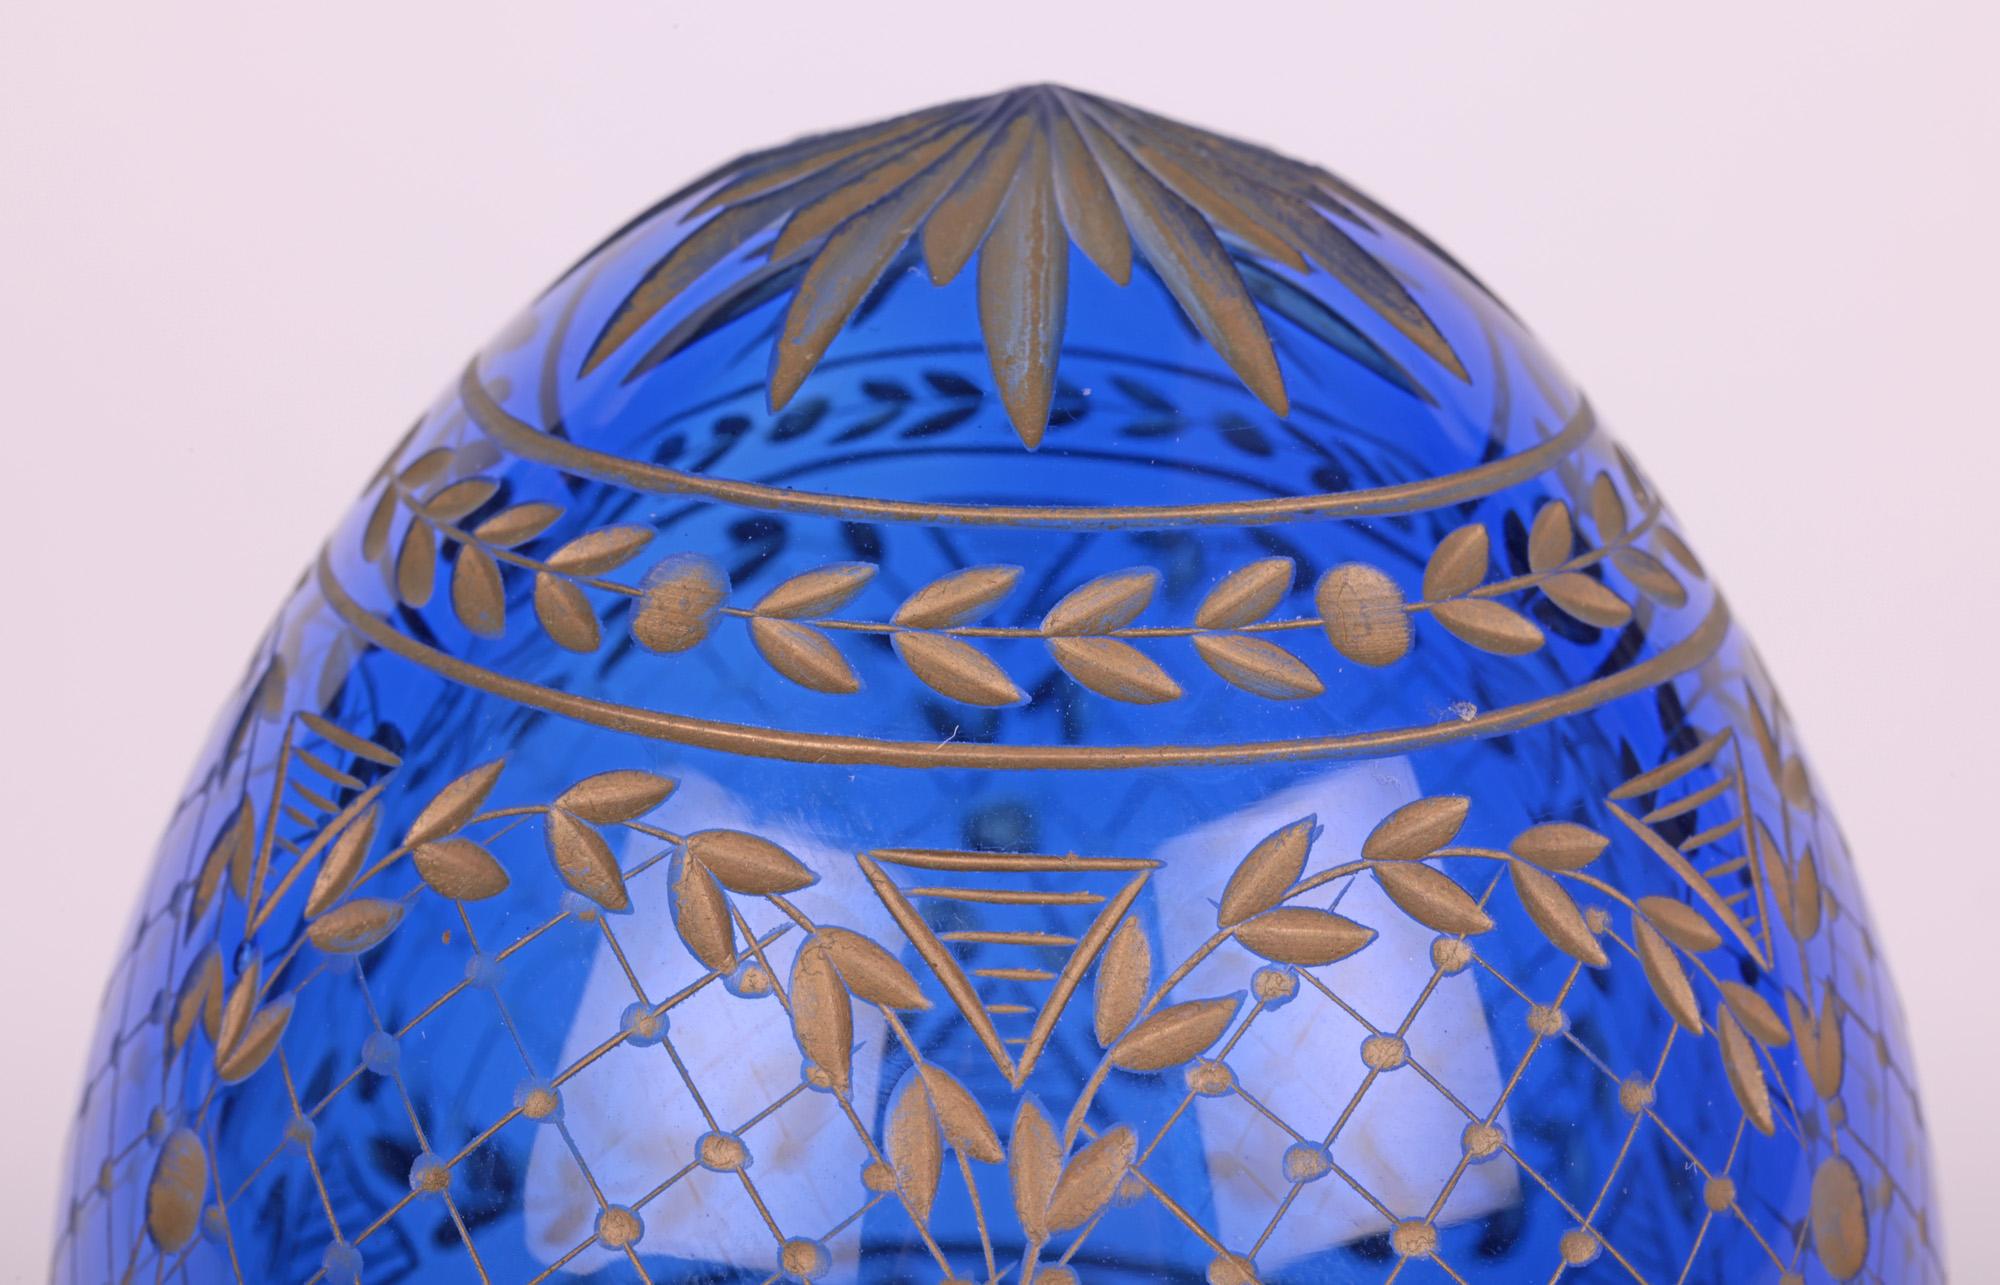 A fine quality large antique/vintage Russian hand-blown engraved cobalt blue glass egg attributed to Faberge and probably dating from the early 20th century. The egg is hollow hand blown and finely made with a small flat polished foot with central